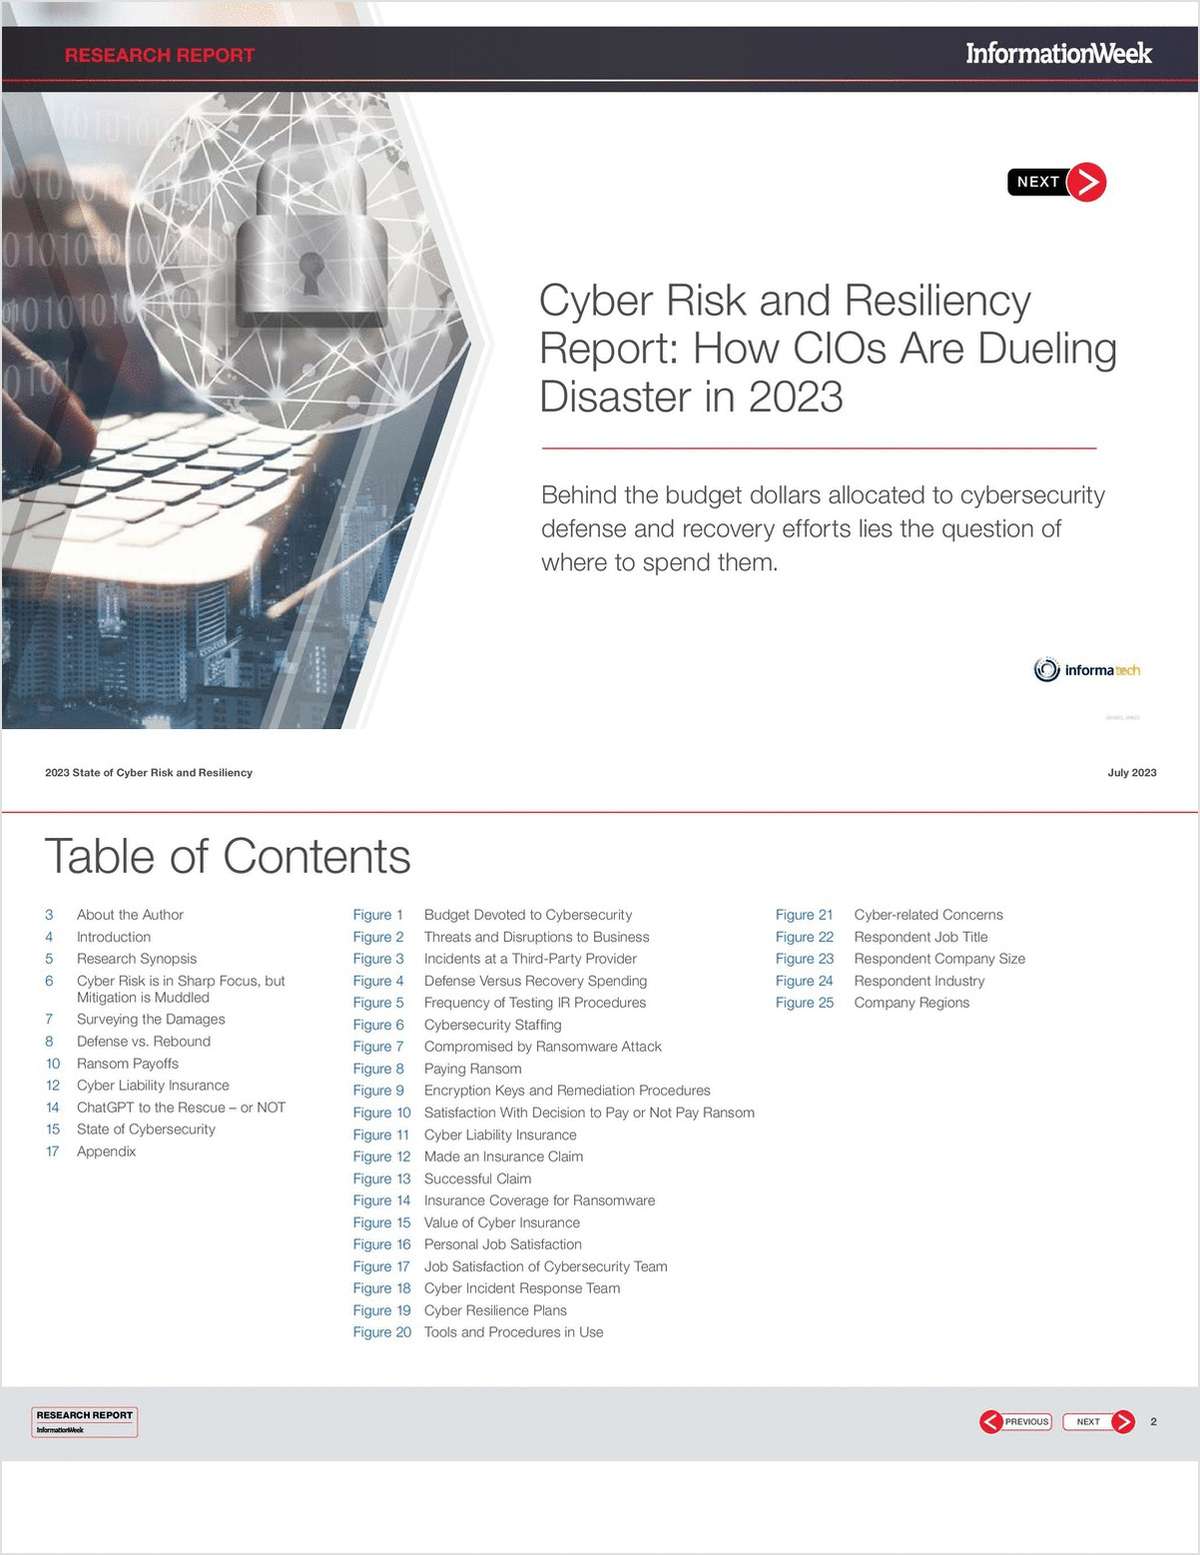 Cyber Risk and Resiliency Report: How CIOs Are Dueling Disaster in 2023